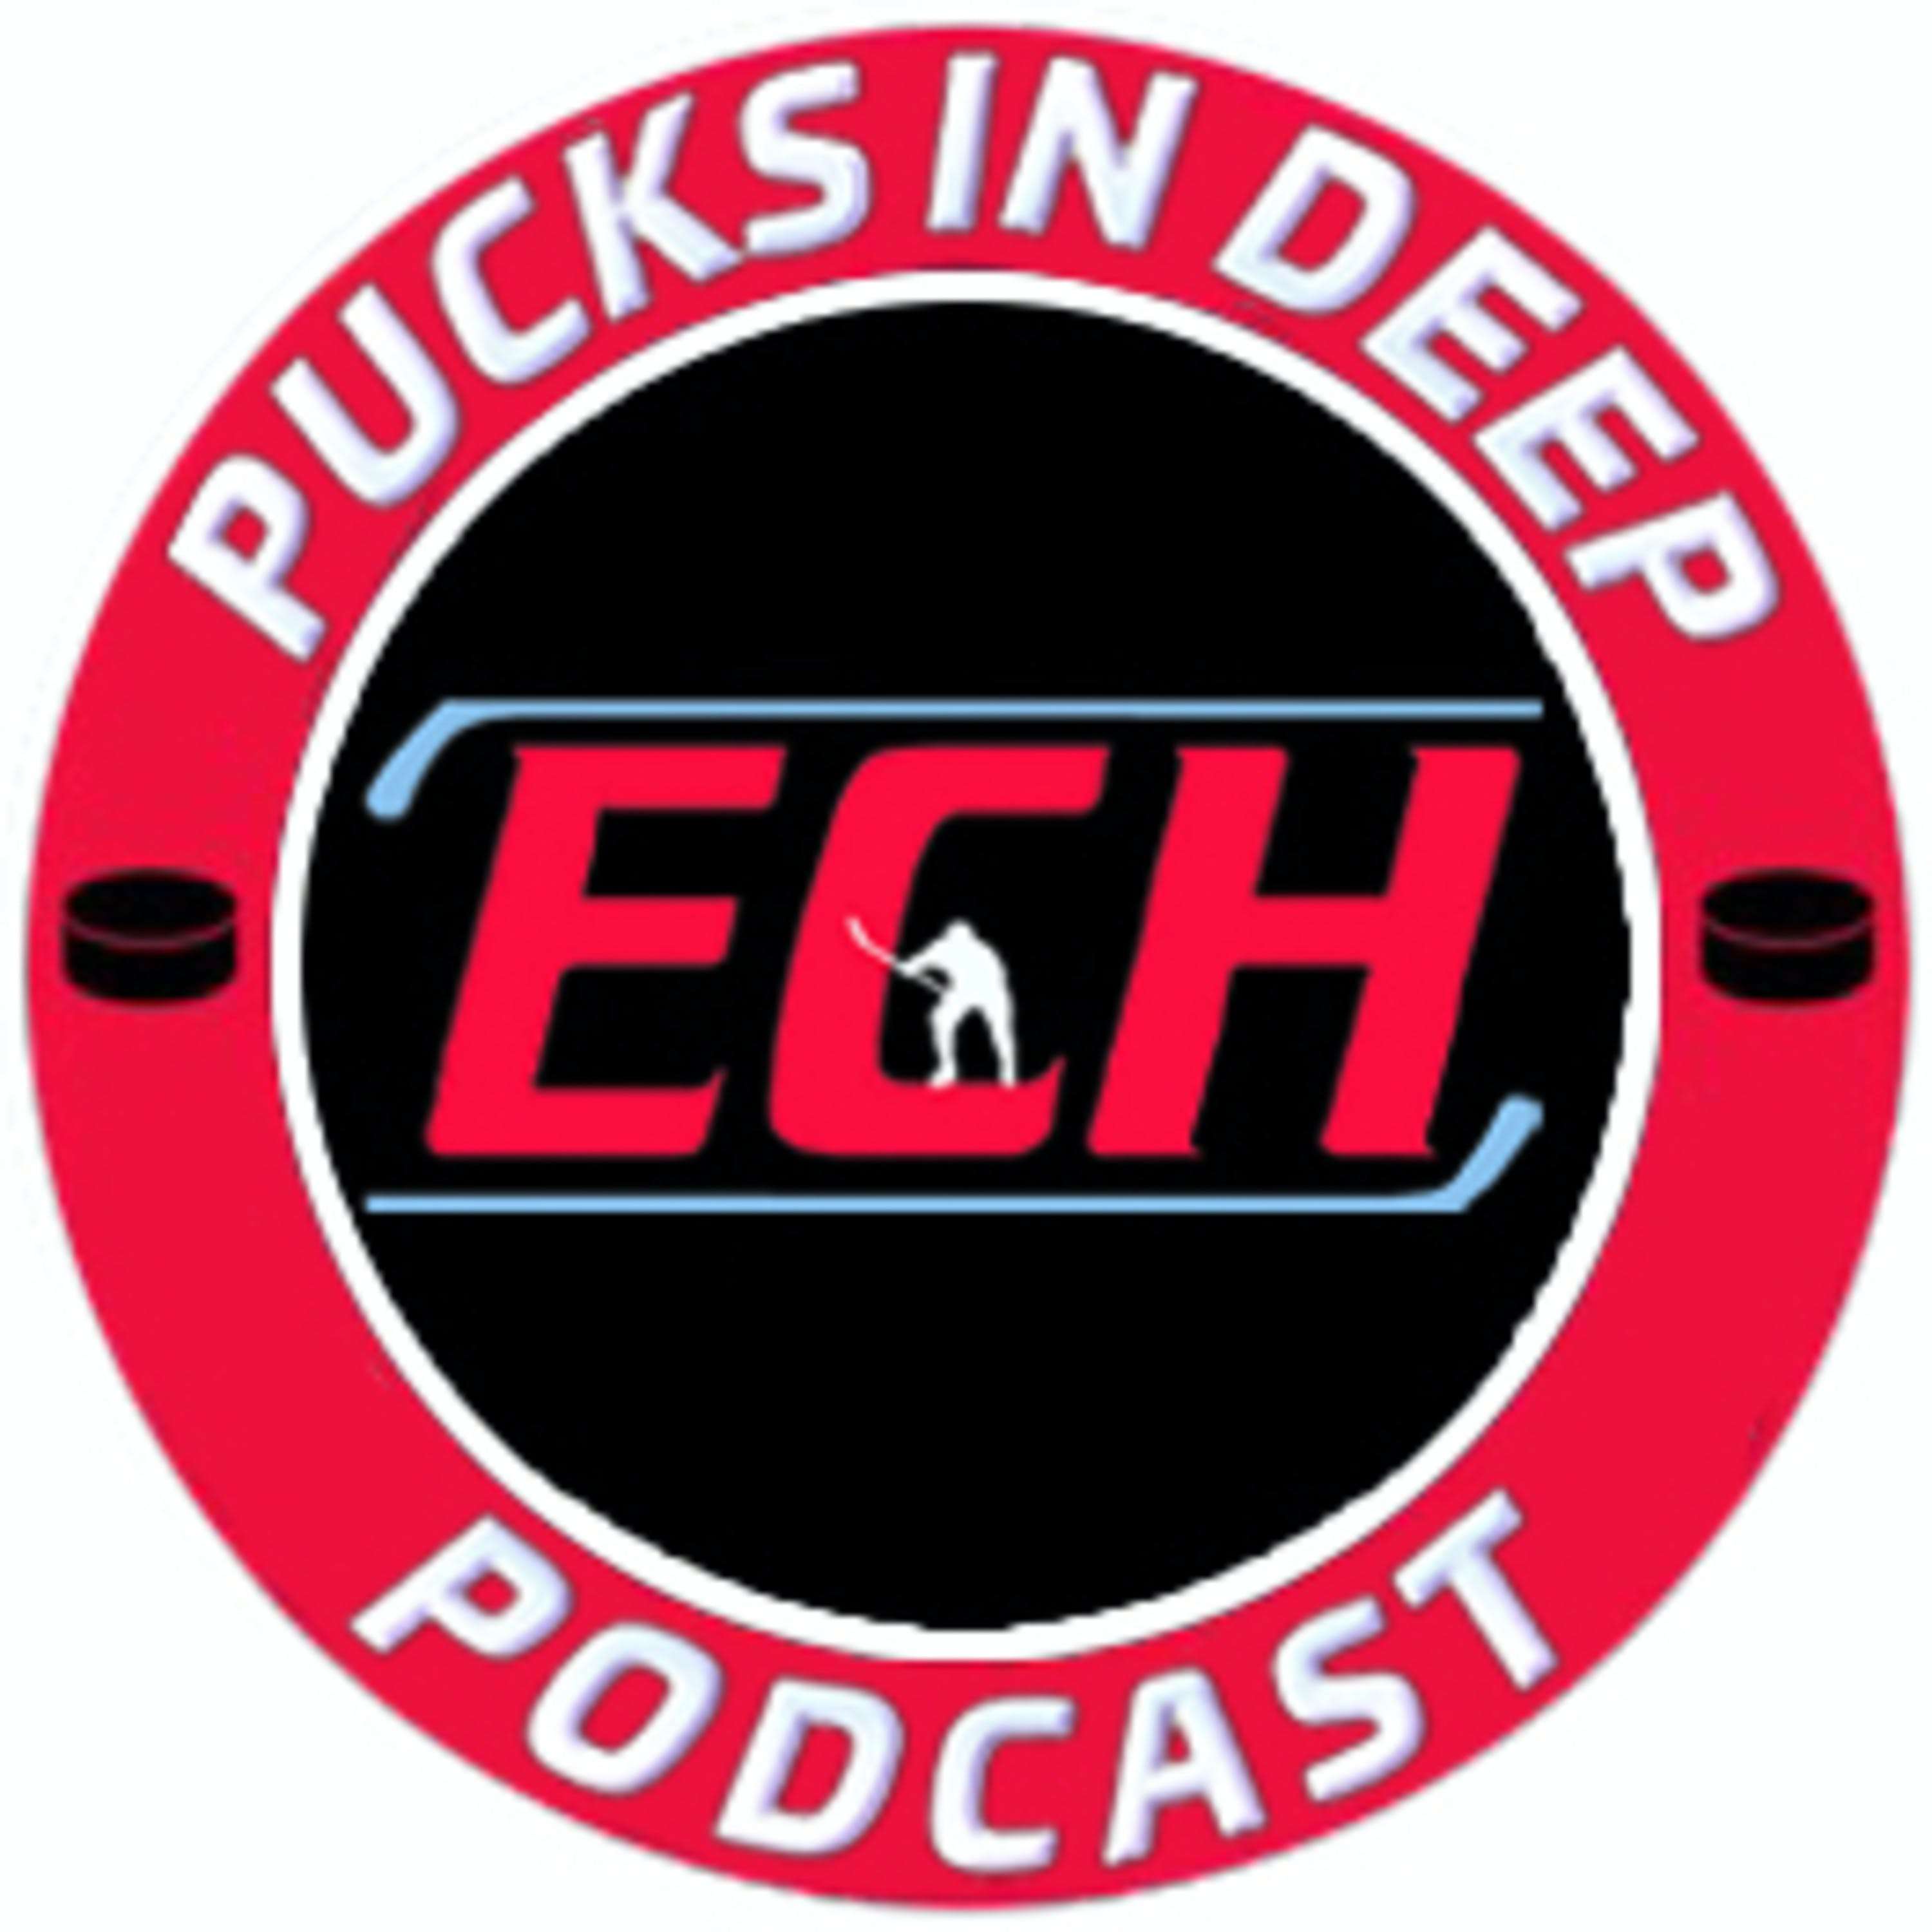 Episode #146 of Pucks in Deep FT: Riese Gaber